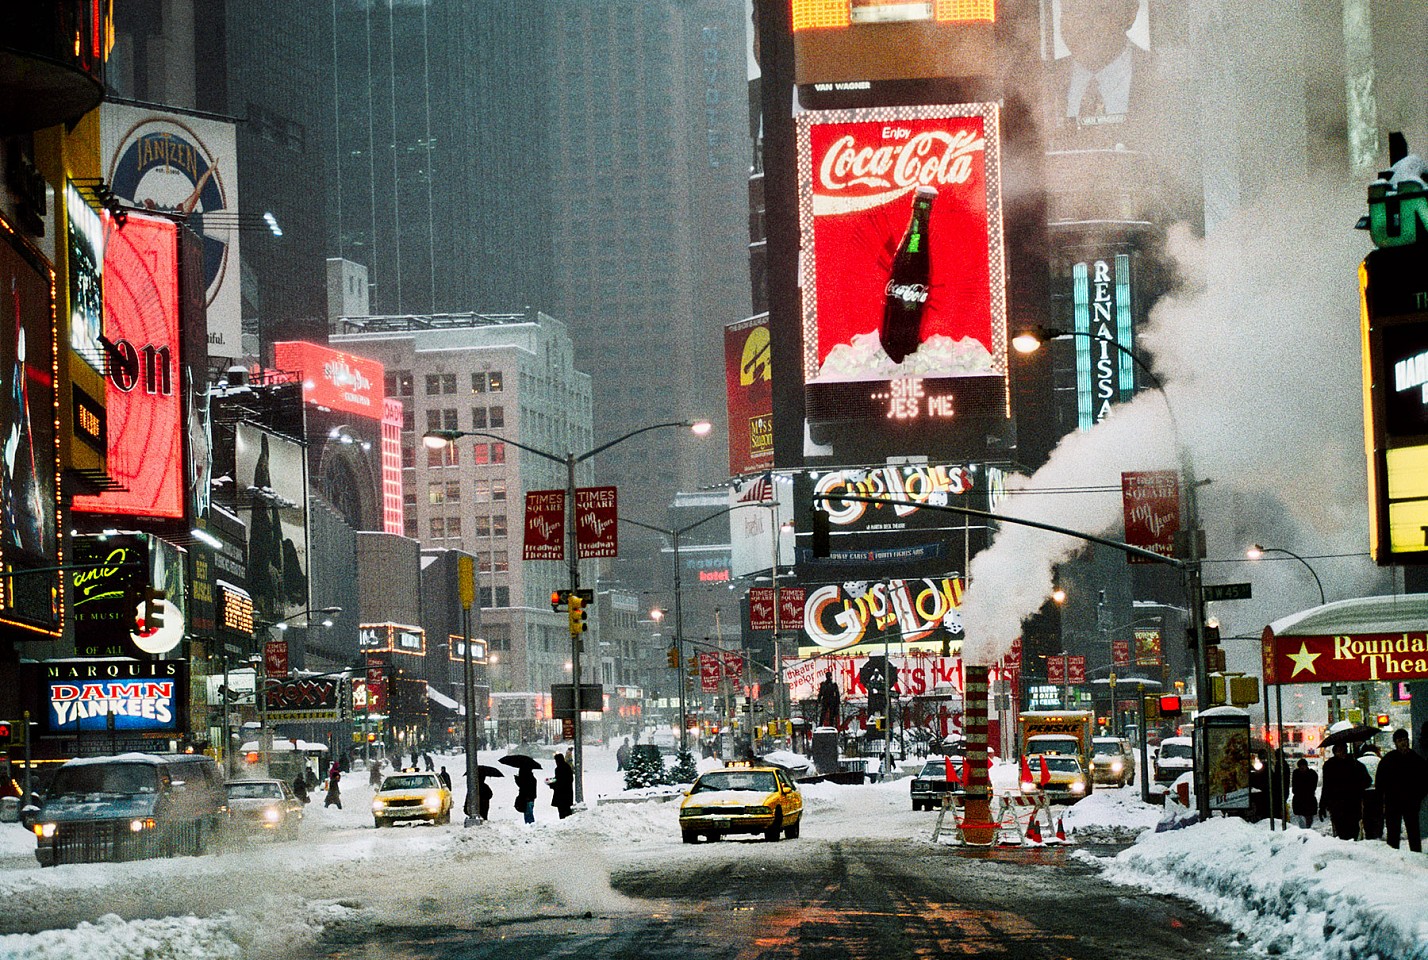 Steve McCurry, Times Square in Winter, New York, NY, 1994
FujiFlex Crystal Archive Print, 40 x 60 in. (Inquire for additional sizes)
USA-10083